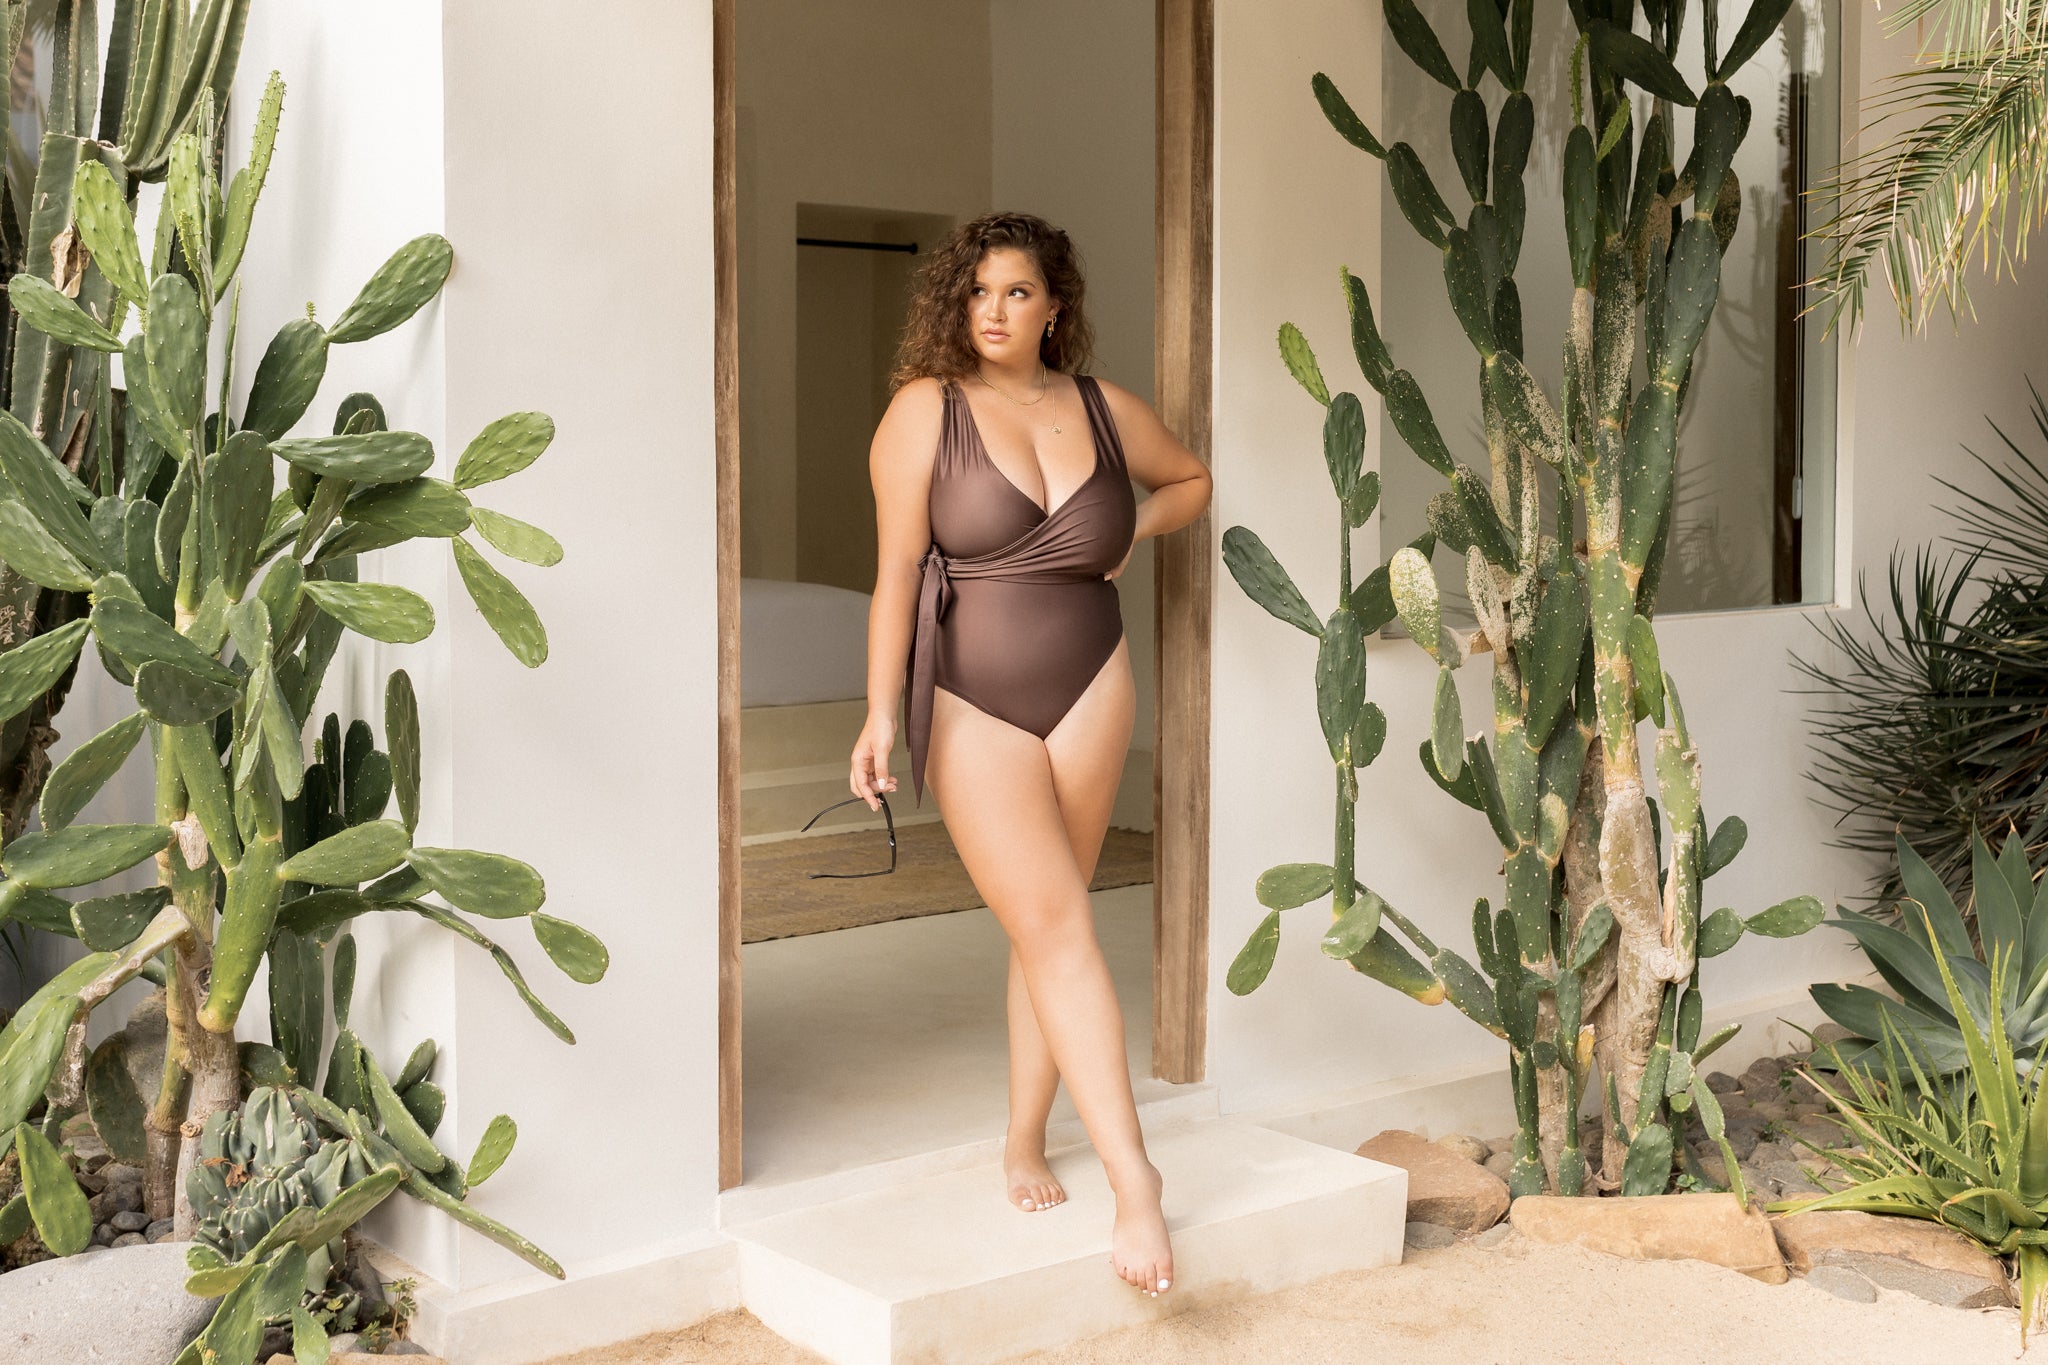 one piece bathing suit with built in shapewear! Linked to this vid tap, One Piece Bathing Suit